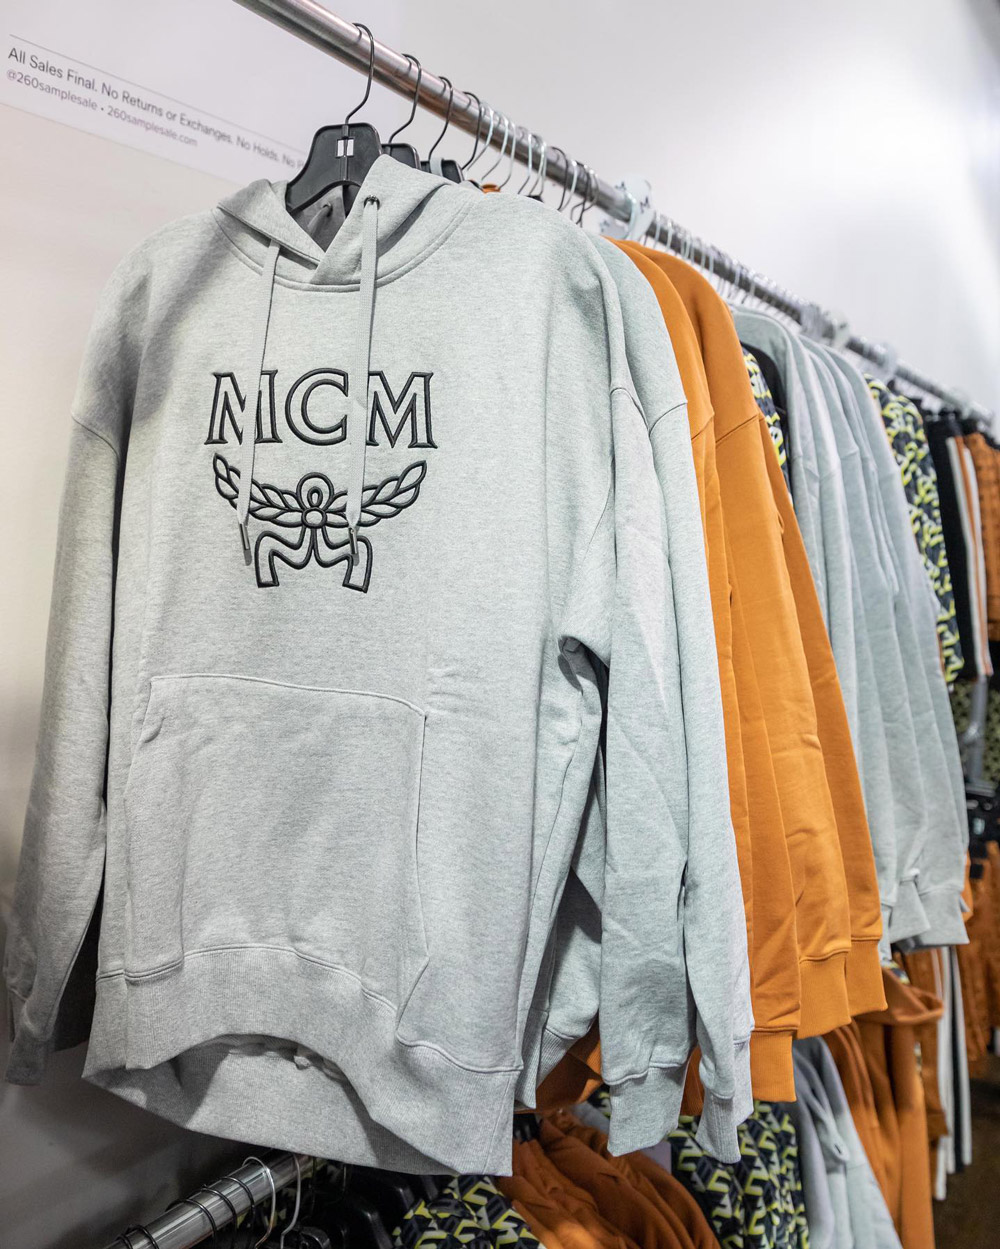 MCM Sample Sale in Images